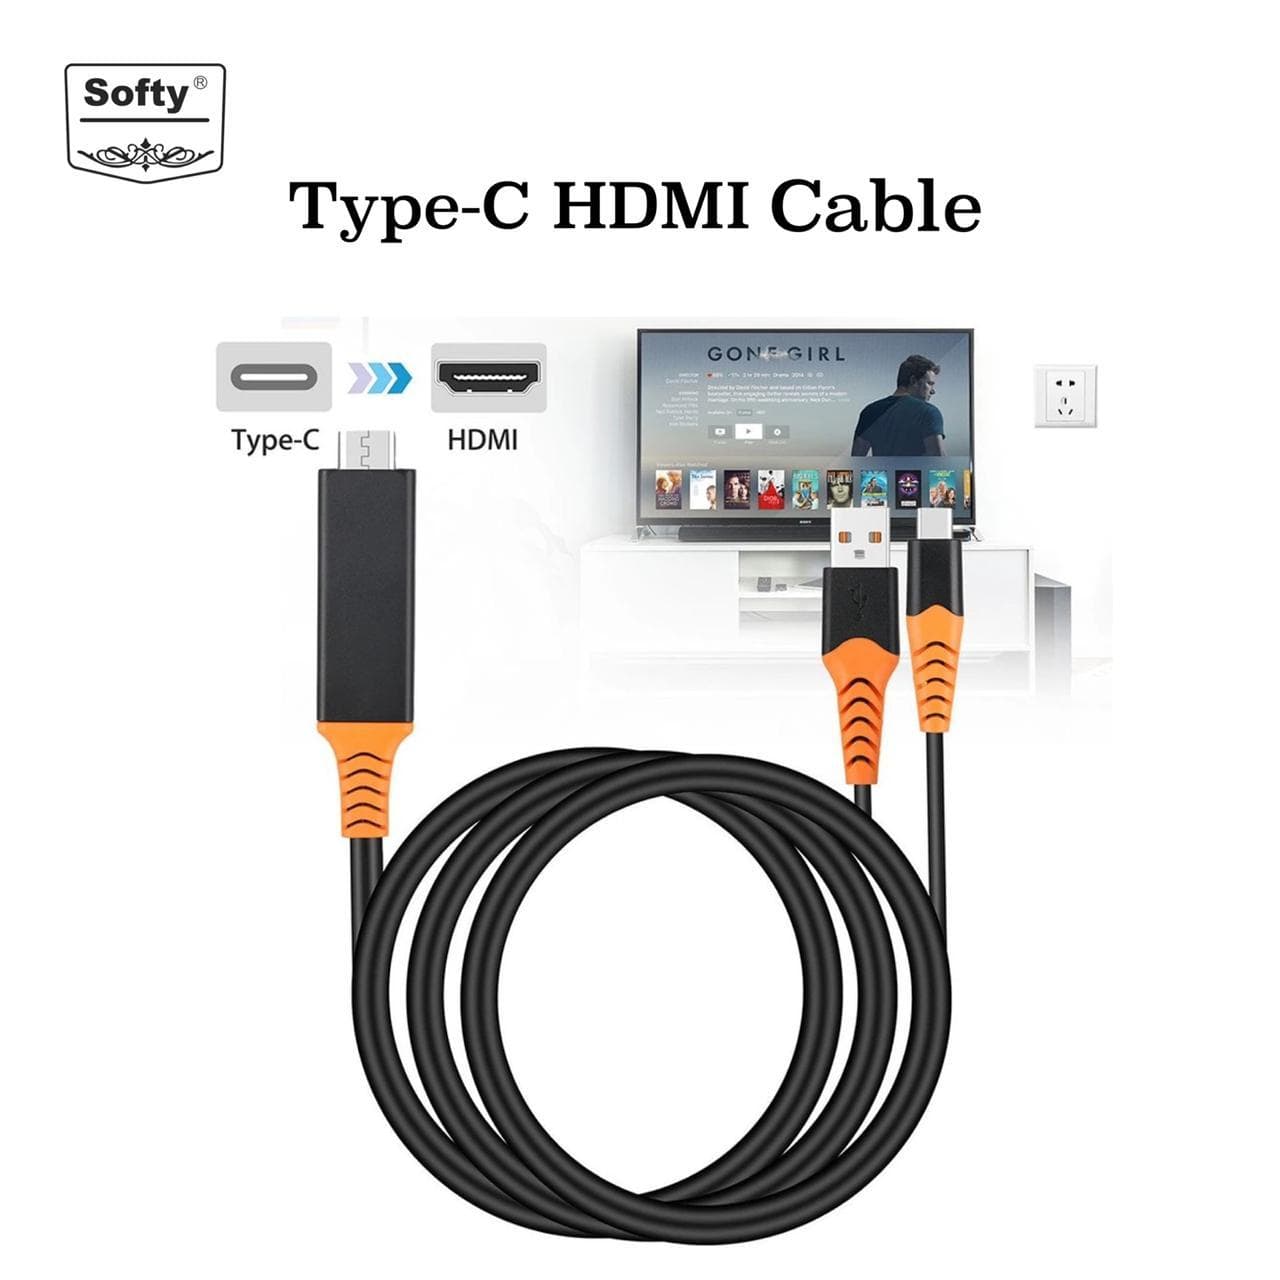 Softy premium quality Type-C HDMI cable-USB Cable-dealsplant